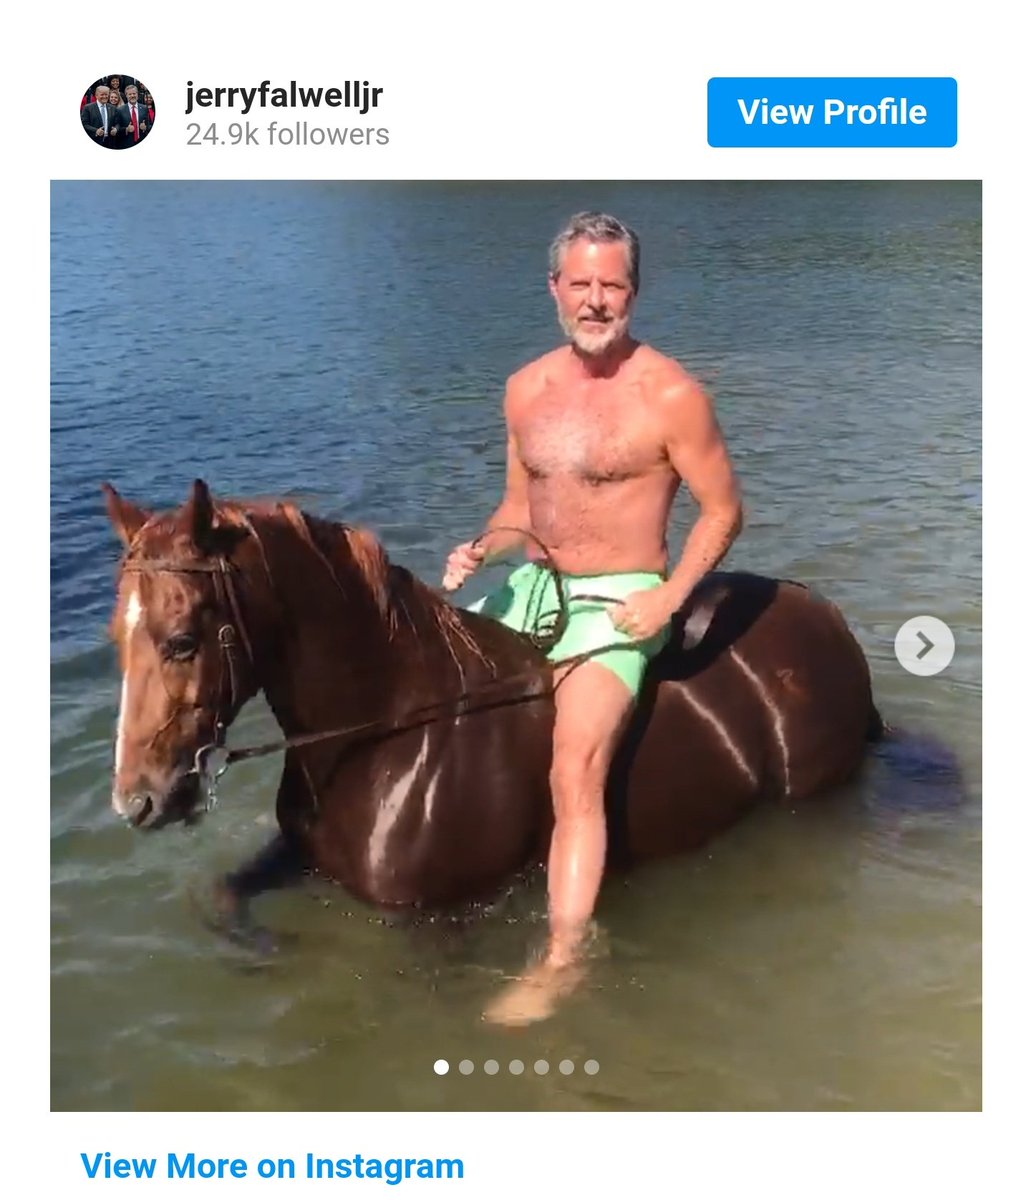 Oh and that horse back thing Seems Jerry Falwell and his trainer share a common interest